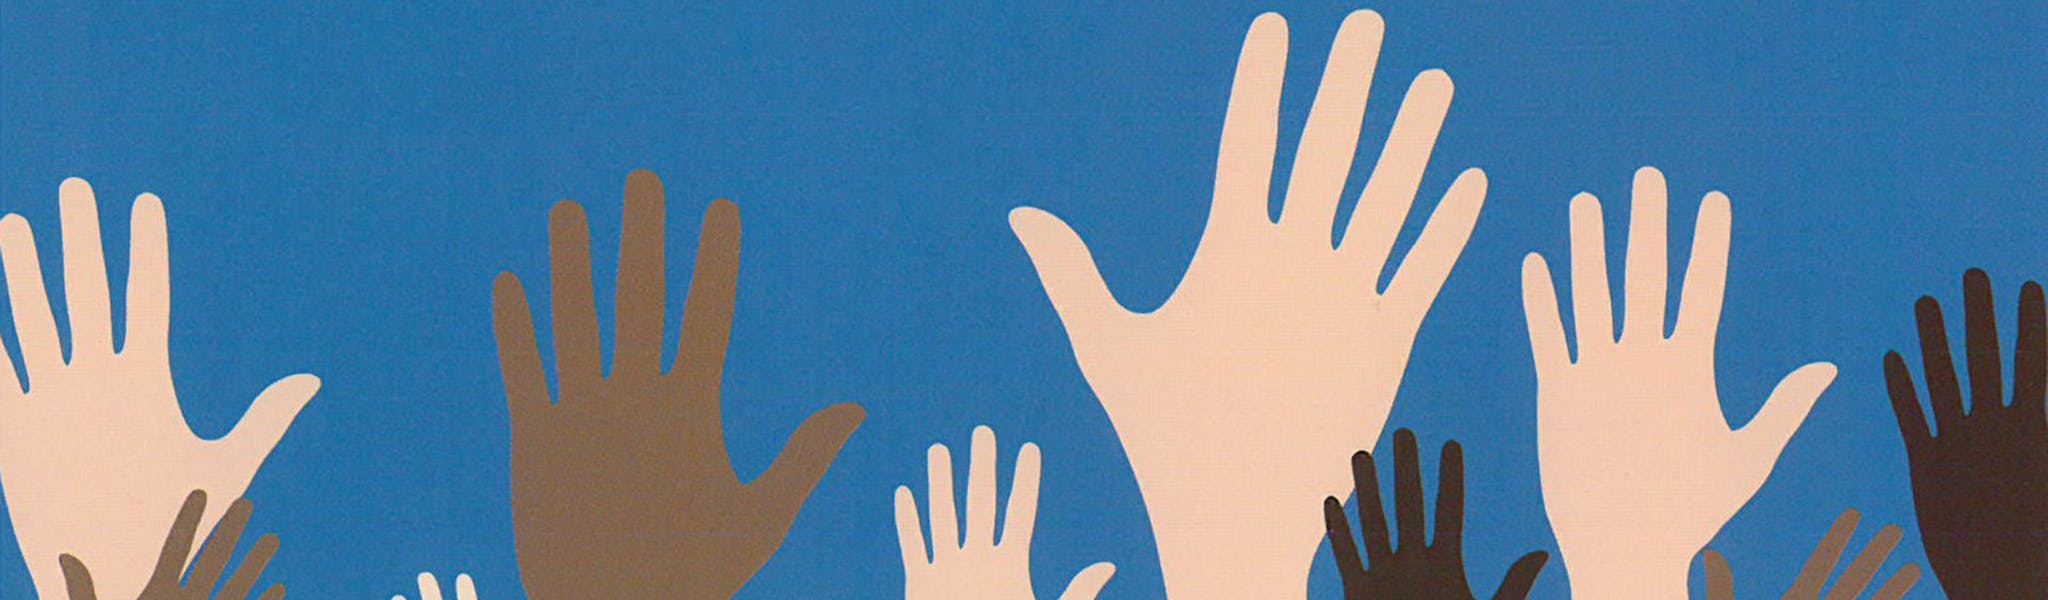 Picture of several hands raised in the air